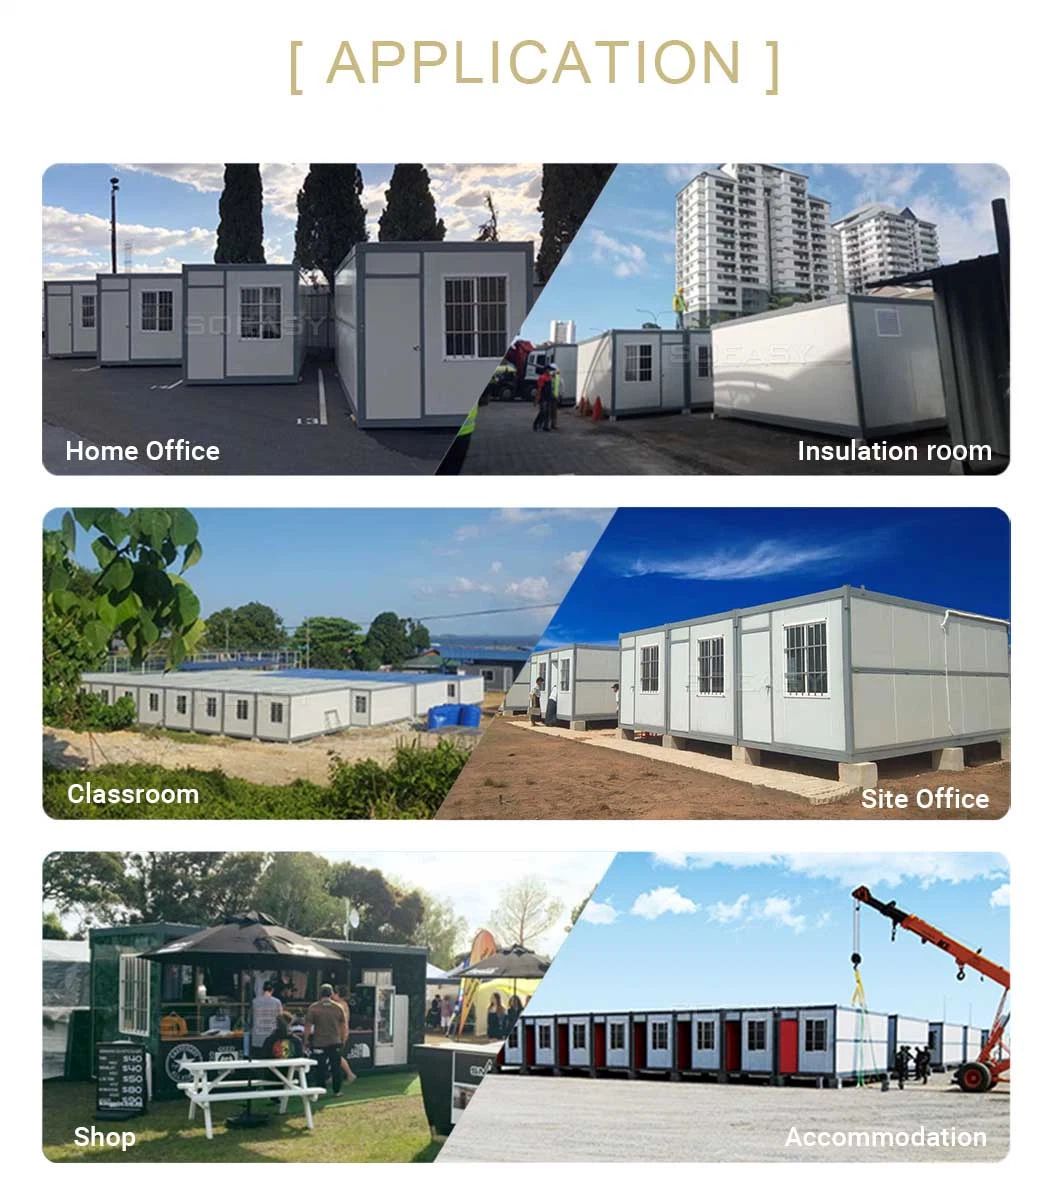 Camp Labor Office Storage Homes Prefabricated Dormitory Folding Container House Prefab Modular Housing Tool House Tiny Home Site Office Container Storage